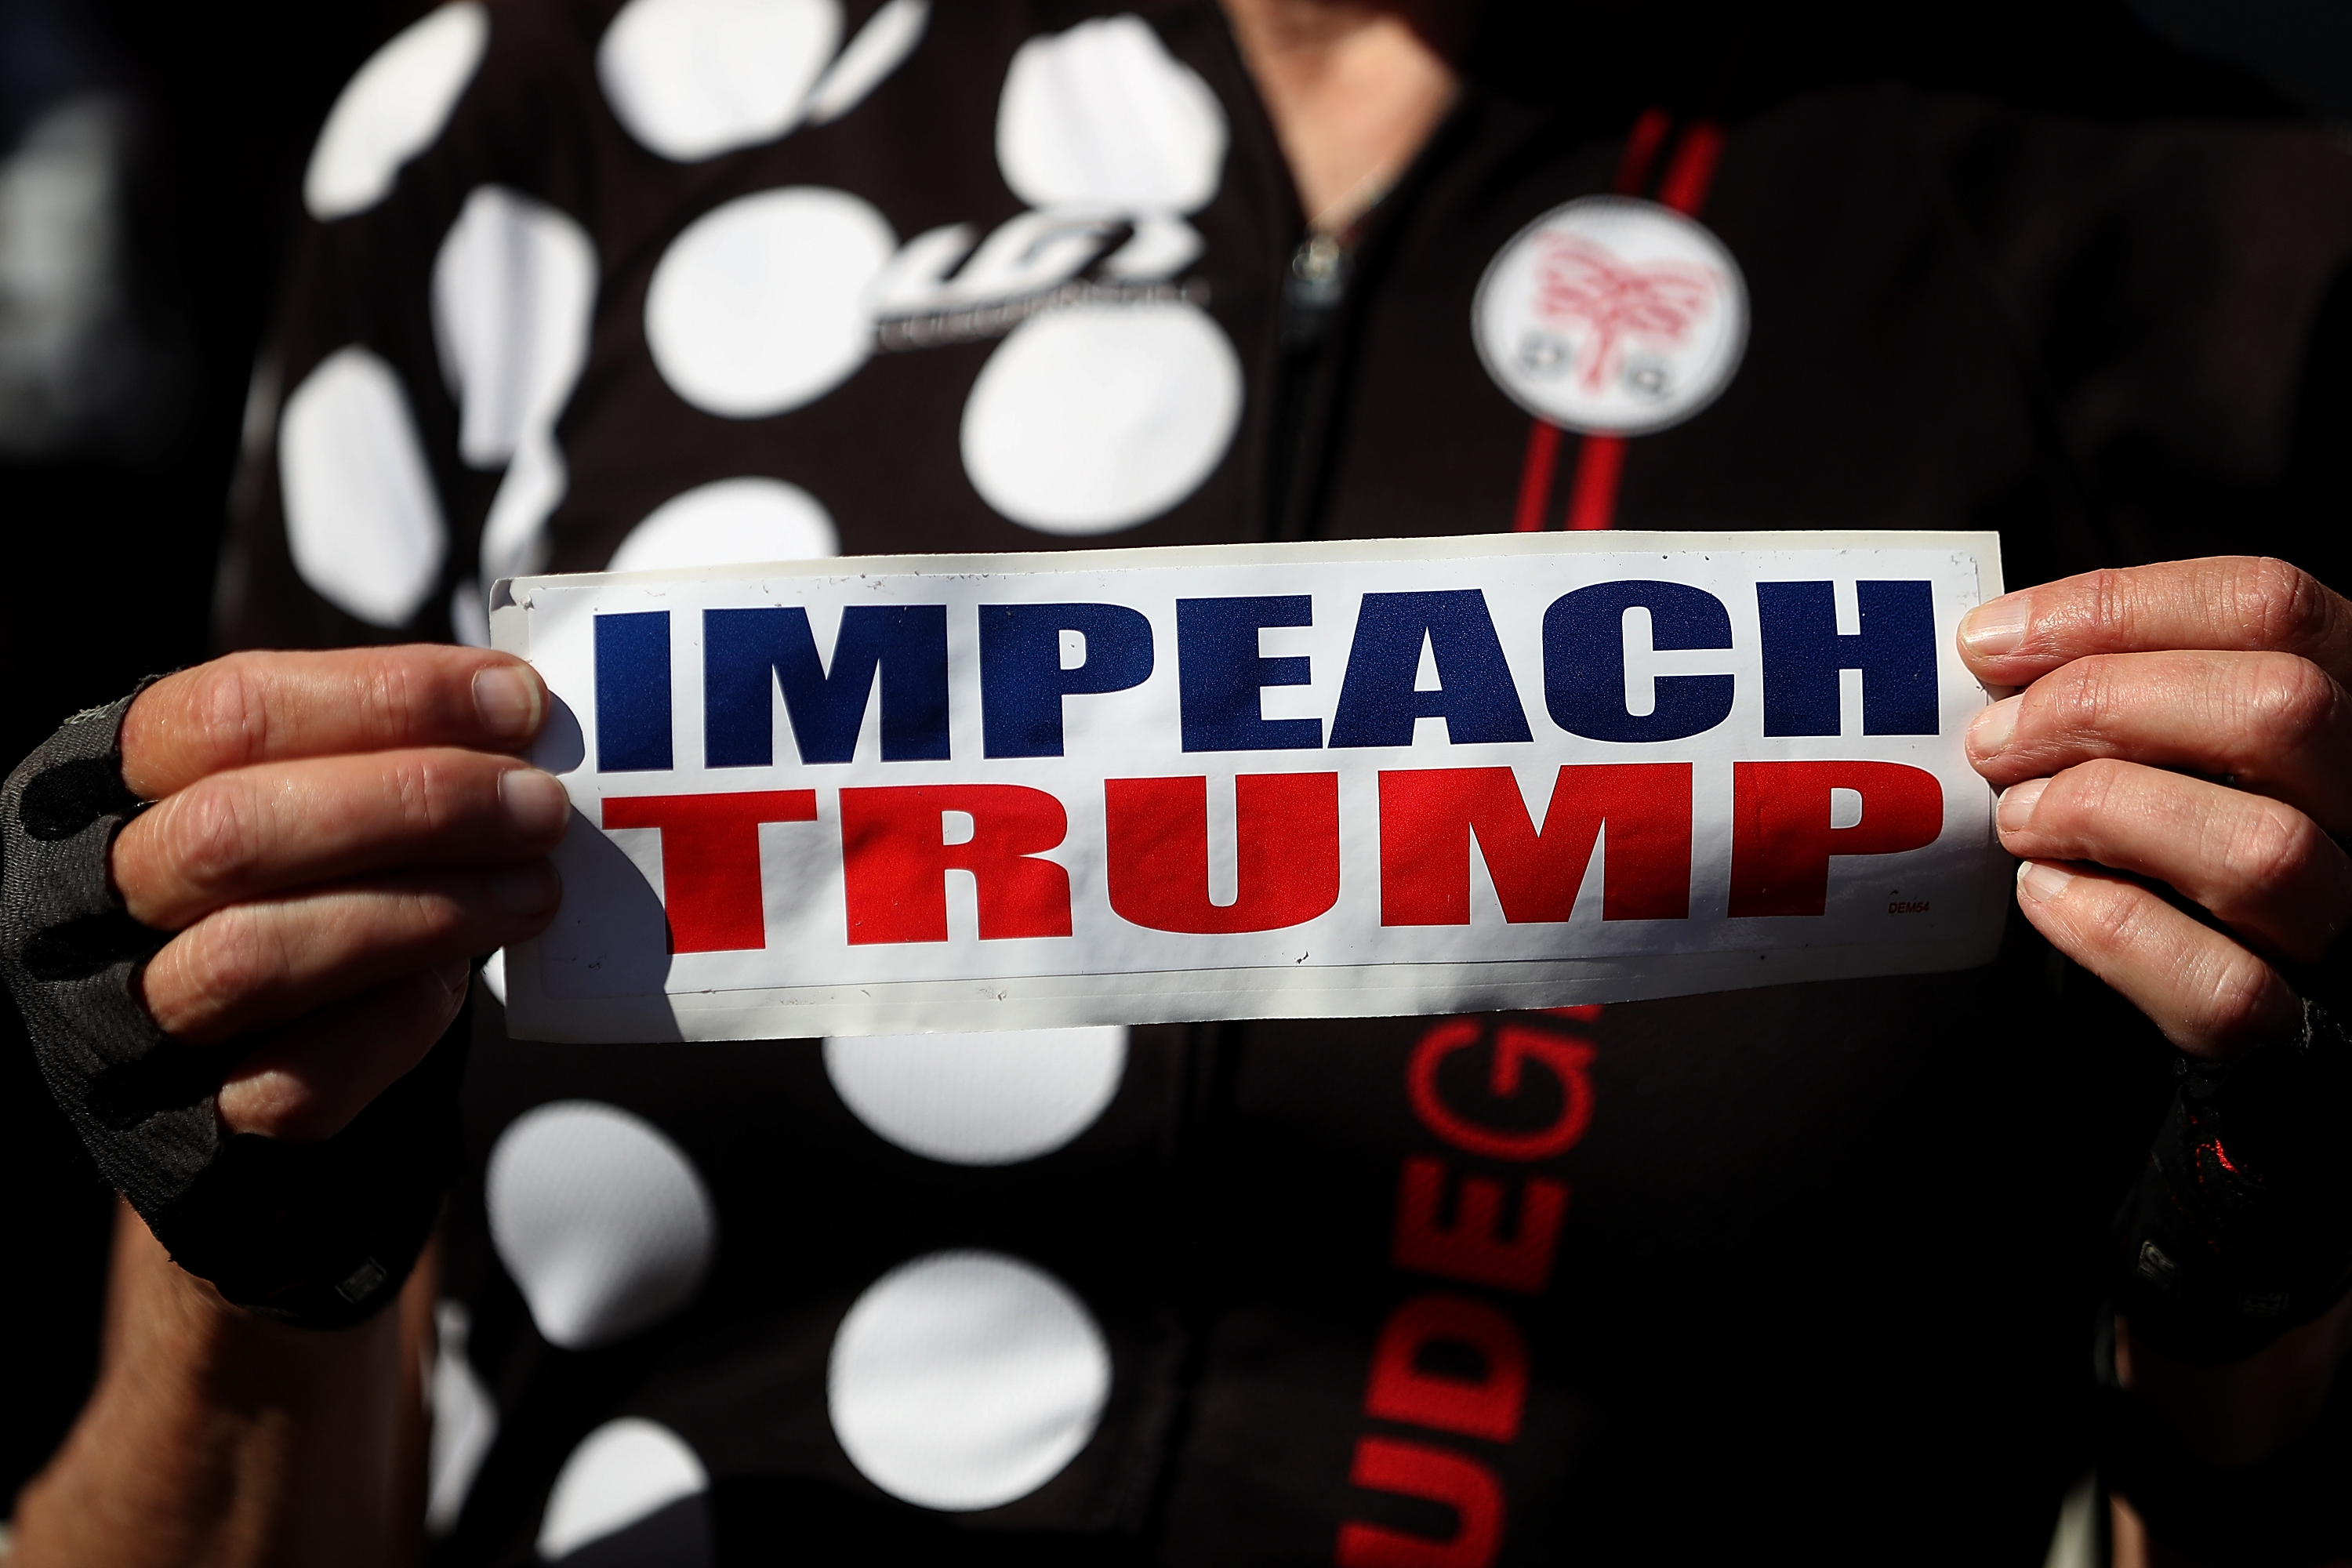 A sign calling for impeachment